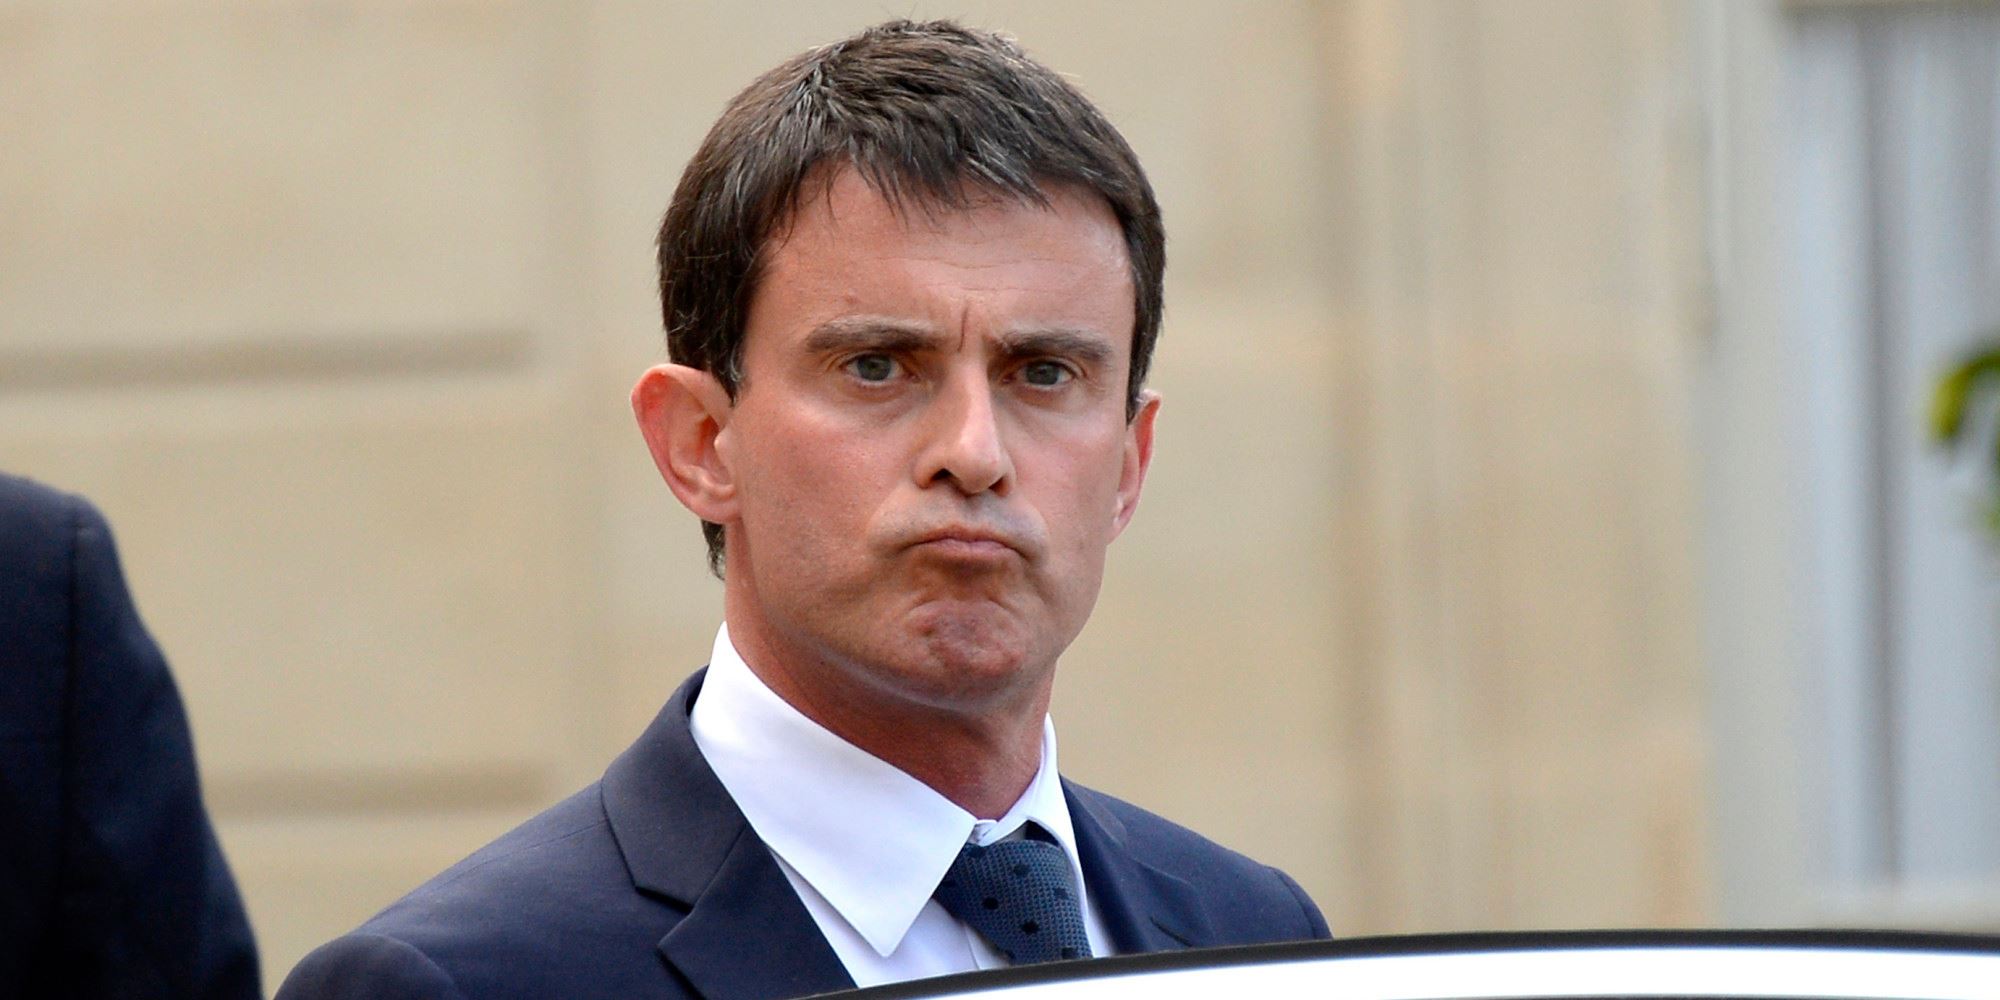 Angry Valls Blank Meme Template